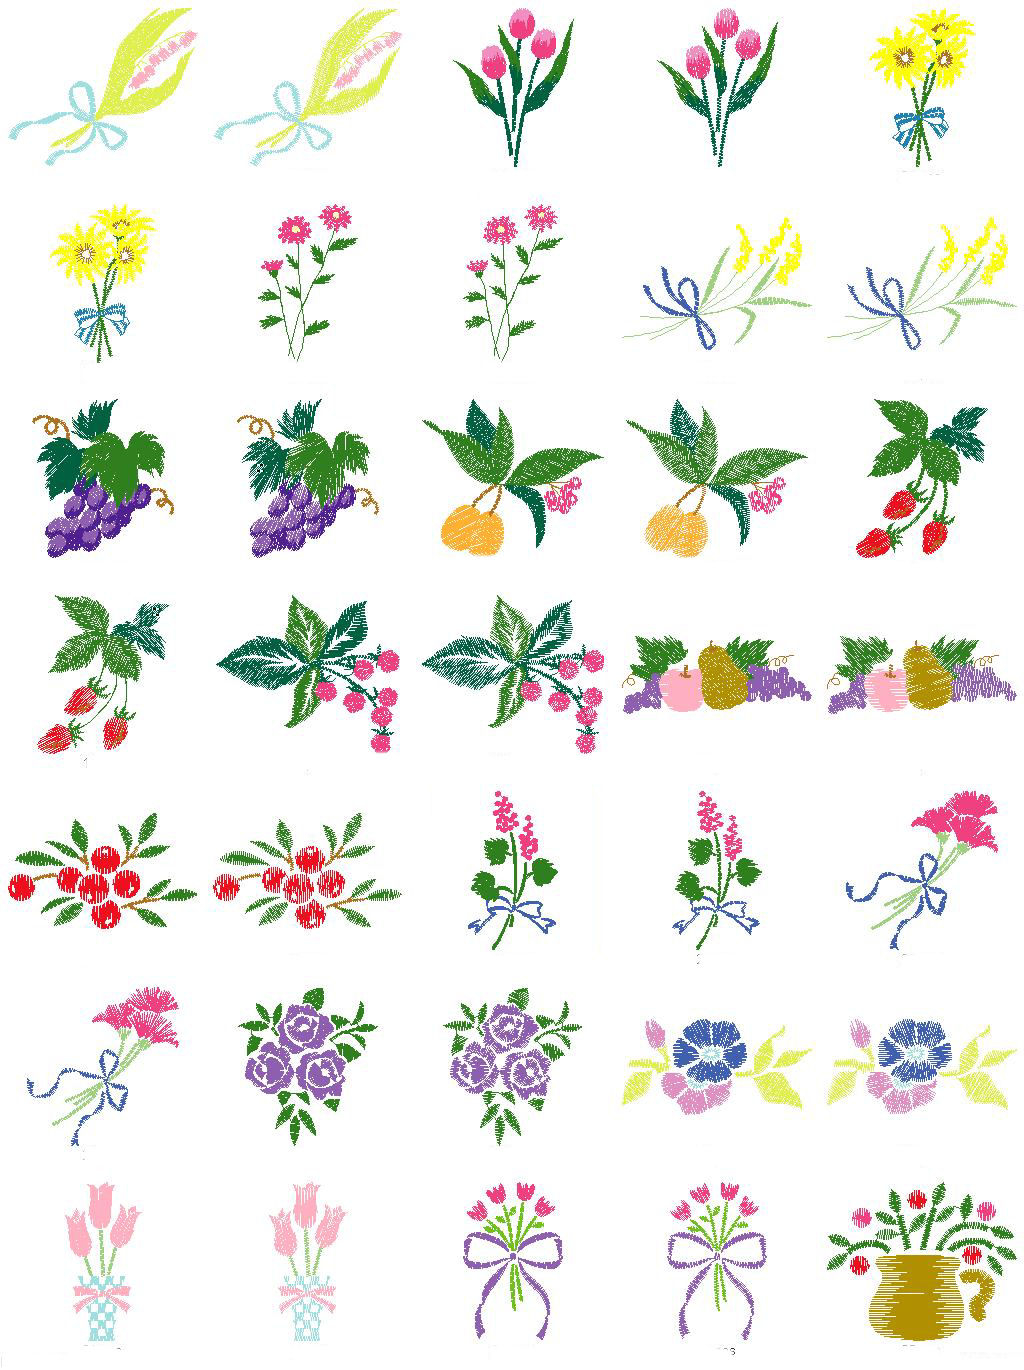 Machine Embroidery Patterns Free 13 Free Embroidery Designs Brother Machine Images Free Butterfly